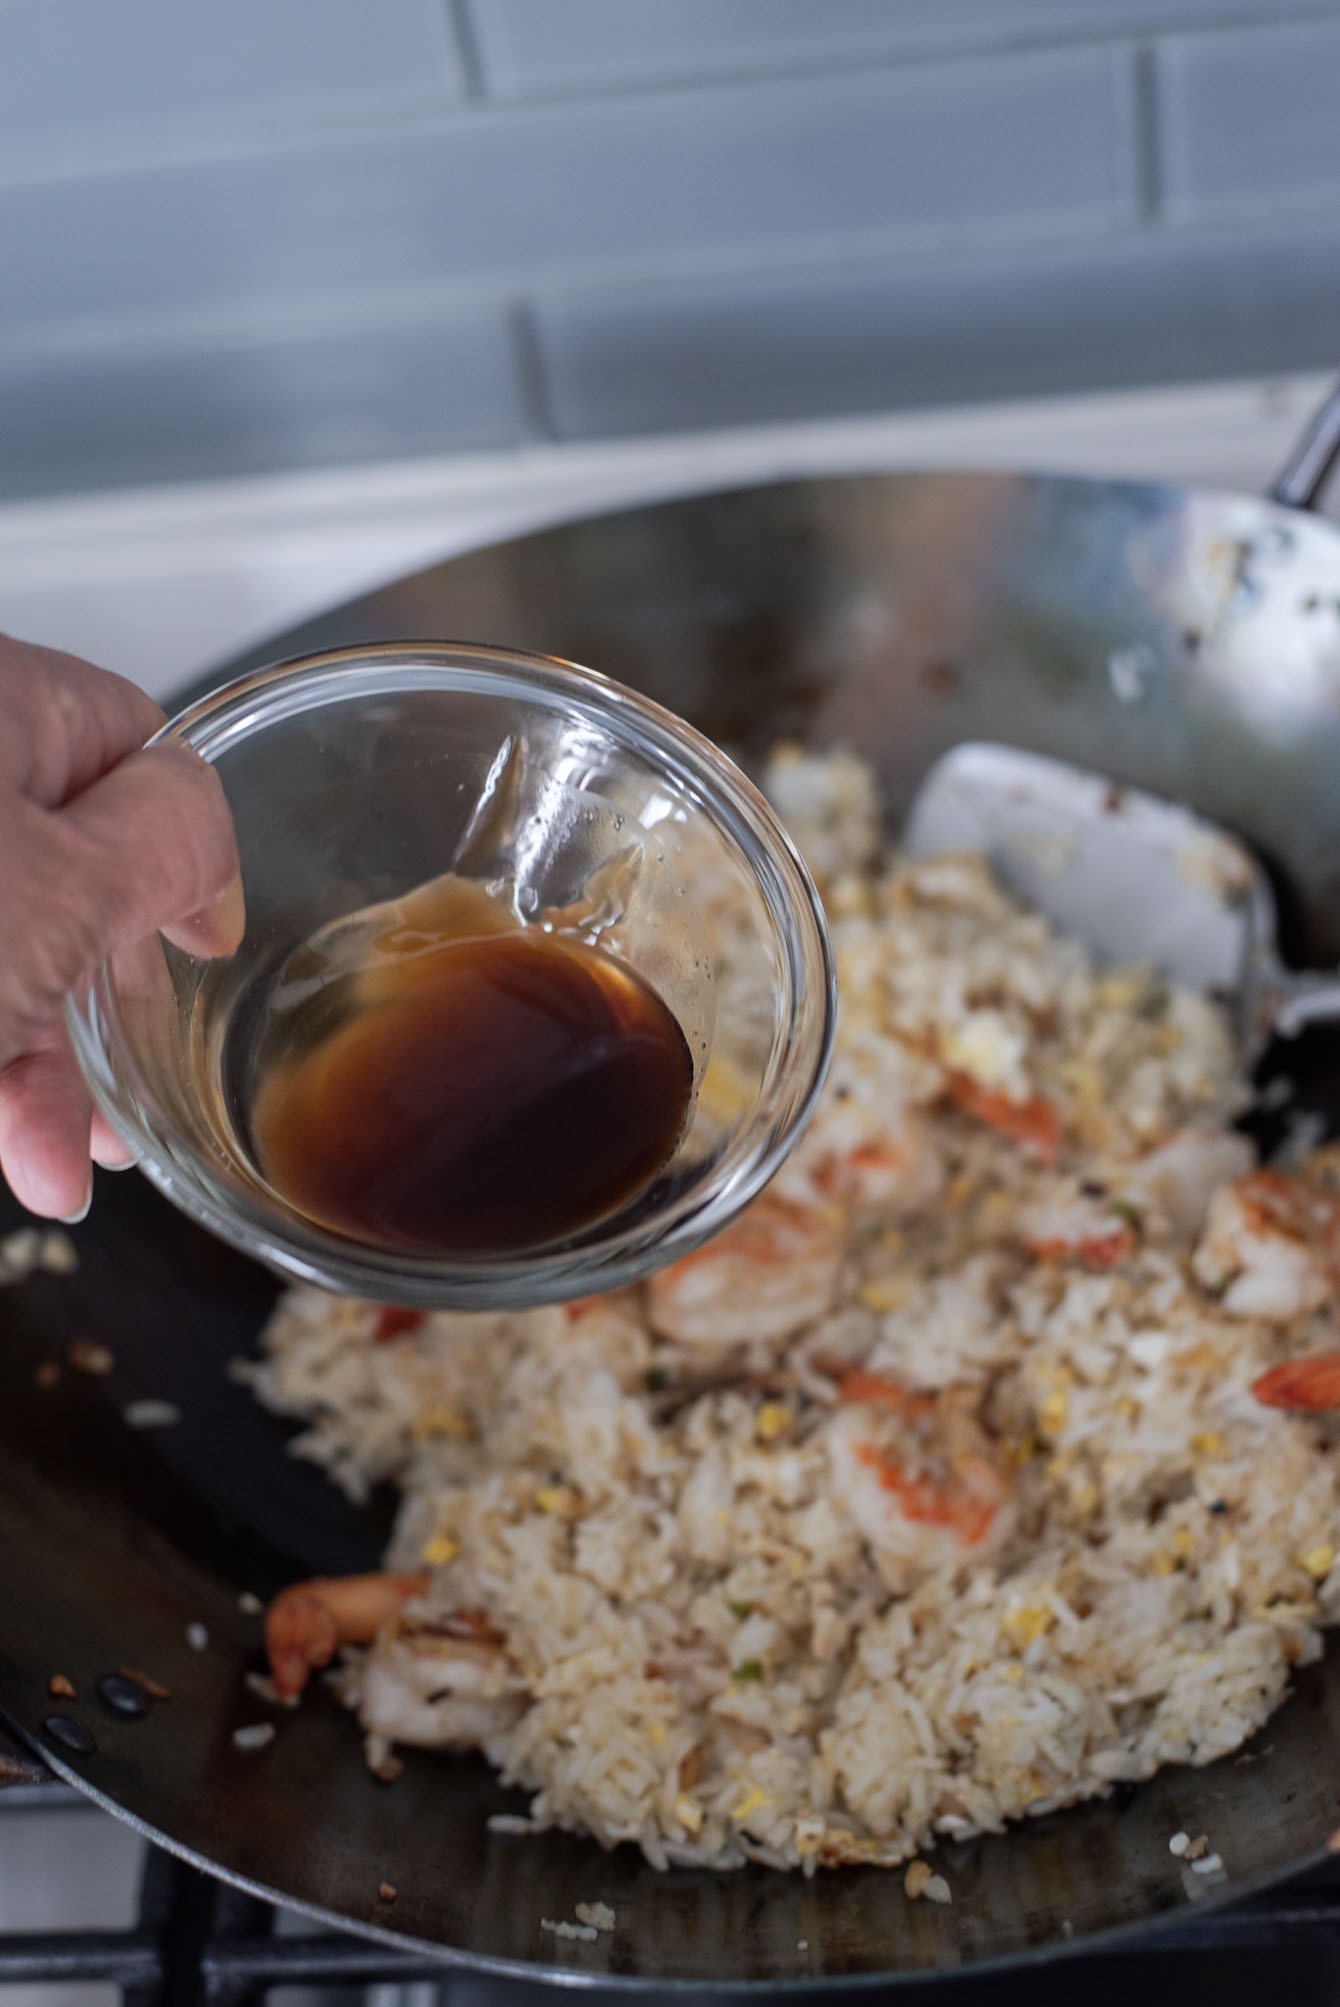 Thai fried rice seasoning is added to the rice mixture